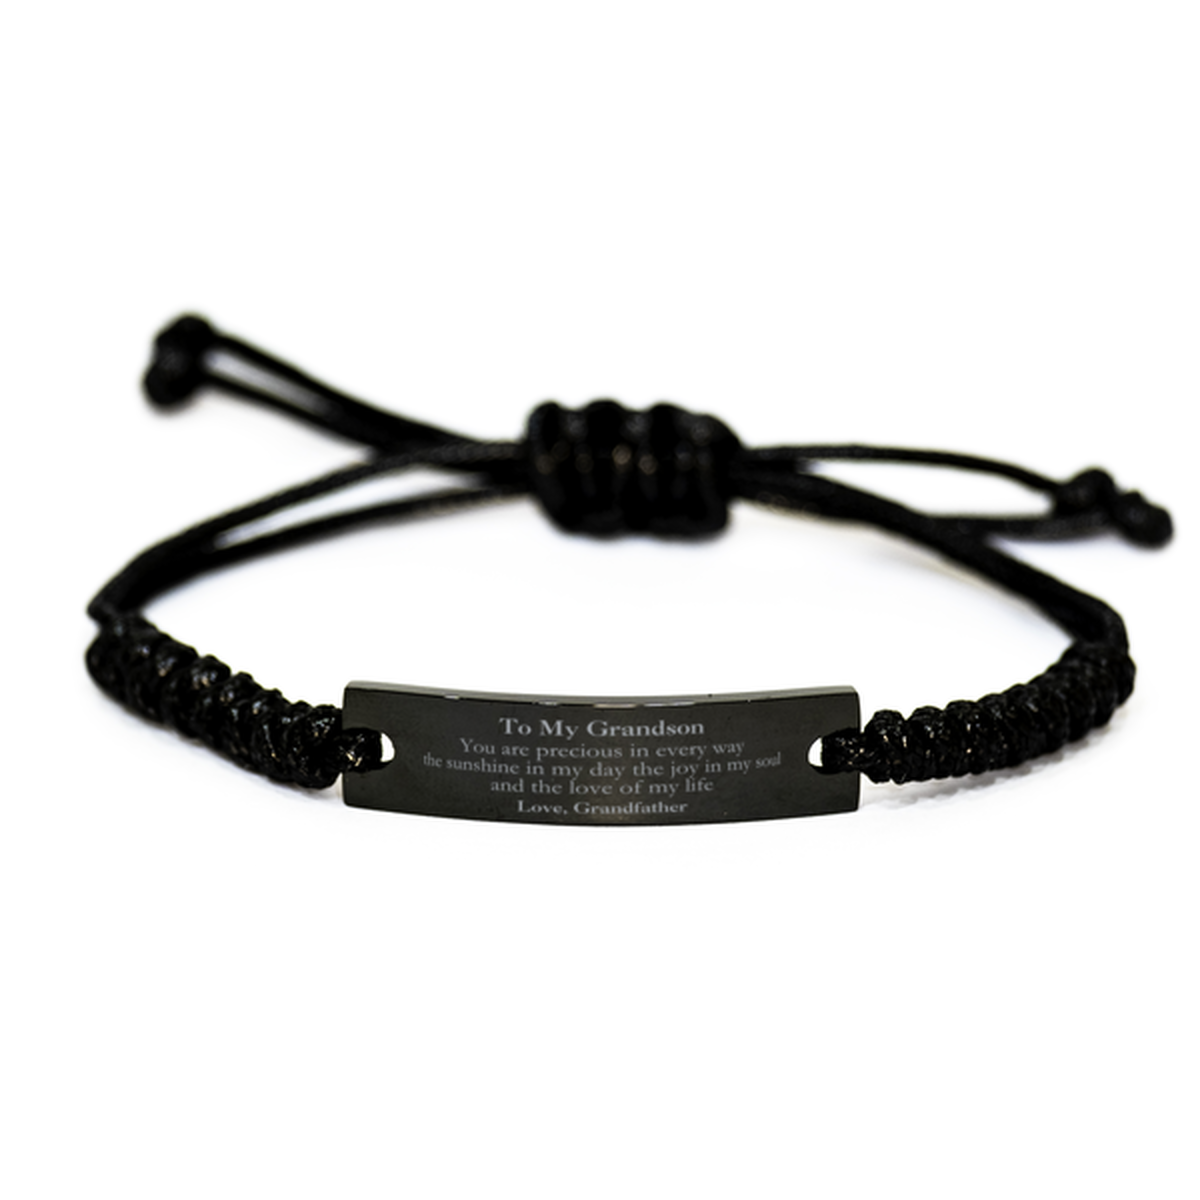 Graduation Gifts for Grandson Black Rope Bracelet Present from Grandfather, Christmas Grandson Birthday Gifts Grandson You are precious in every way the sunshine in my day. Love, Grandfather